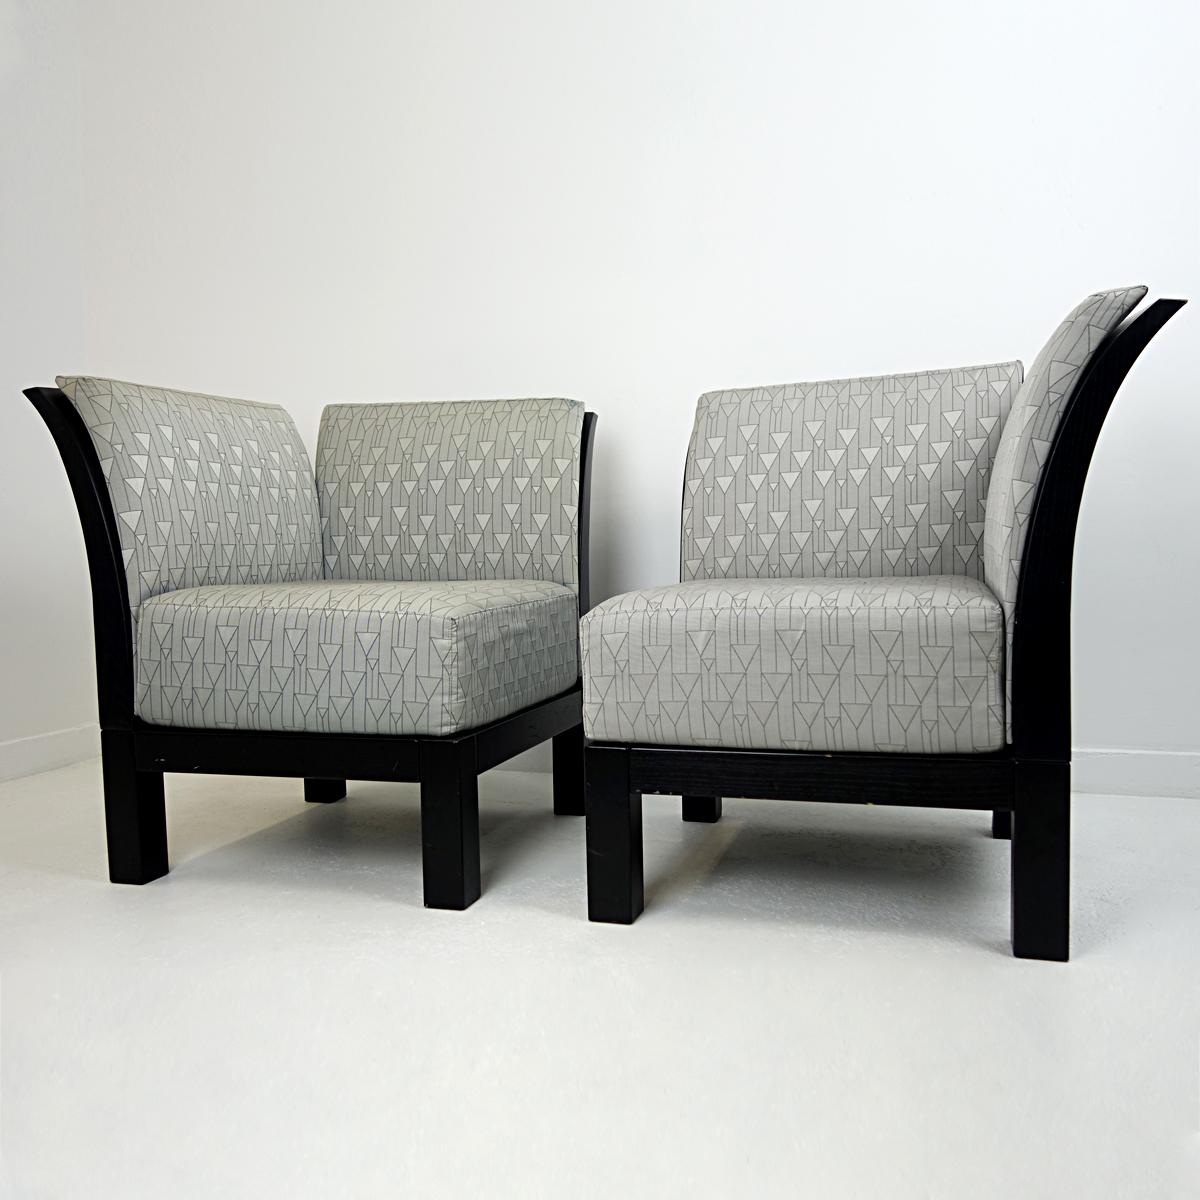 Austrian Pair of Postmodern Wooden Easy Chairs or Bench with Graphic Fabric by Thonet